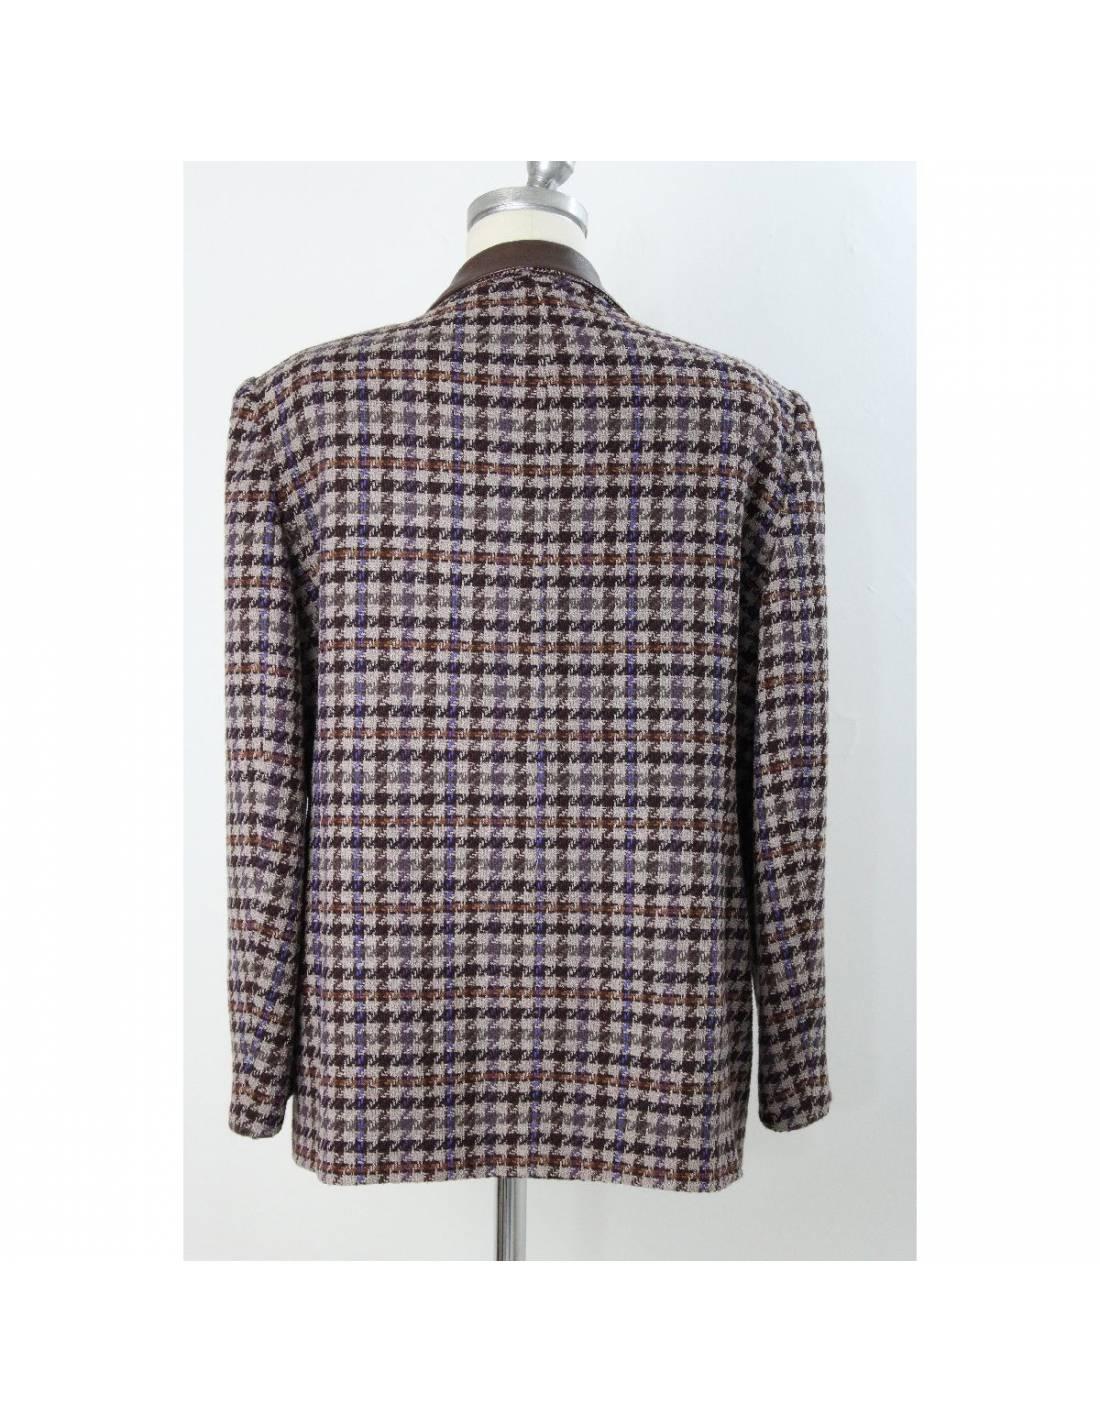 Vintage tweed jacket by laura biagiotti from 1980s with a beautiful plaid fabric in wool, brown and beige with purple inserts, leather details on the collar and on the pockets. Made in Italy in excellent condition.

SIZE: 48 It 14 Us 16